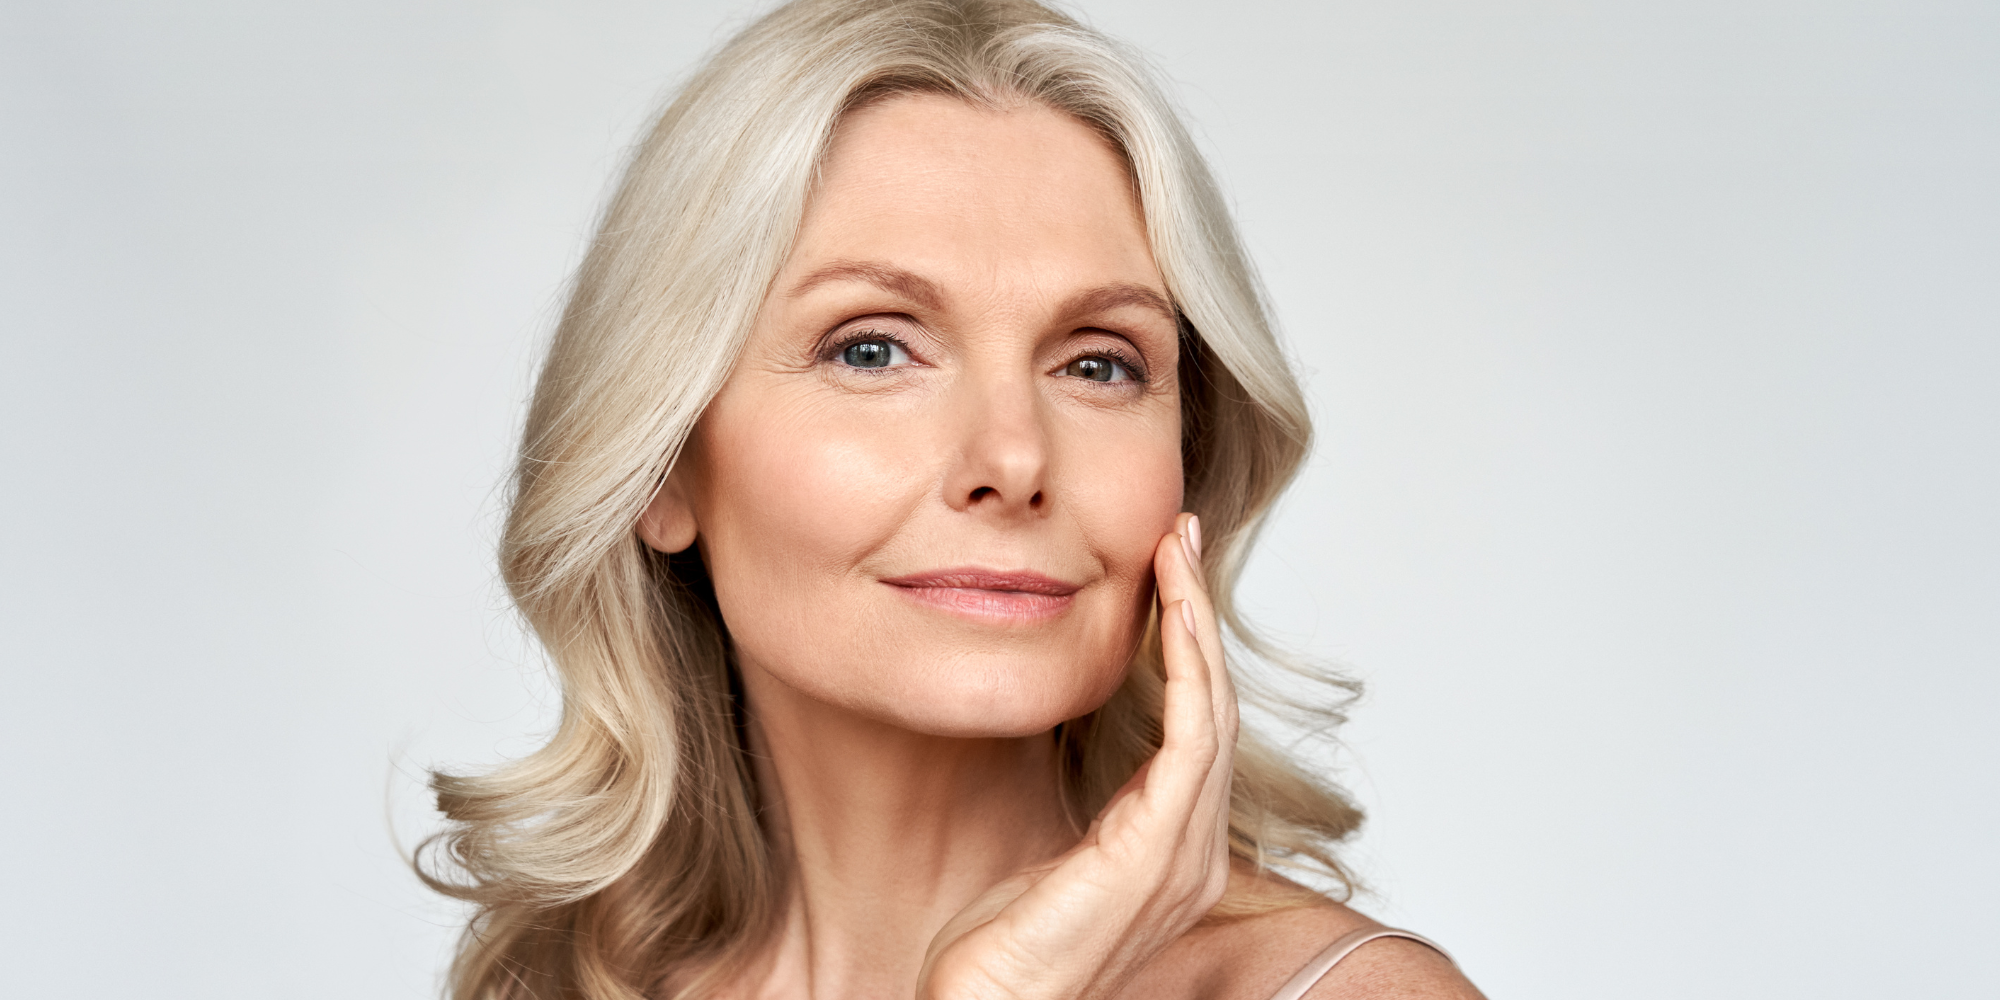 Anti Aging Skincare Products for 50 year olds | Skoah Skin Care 